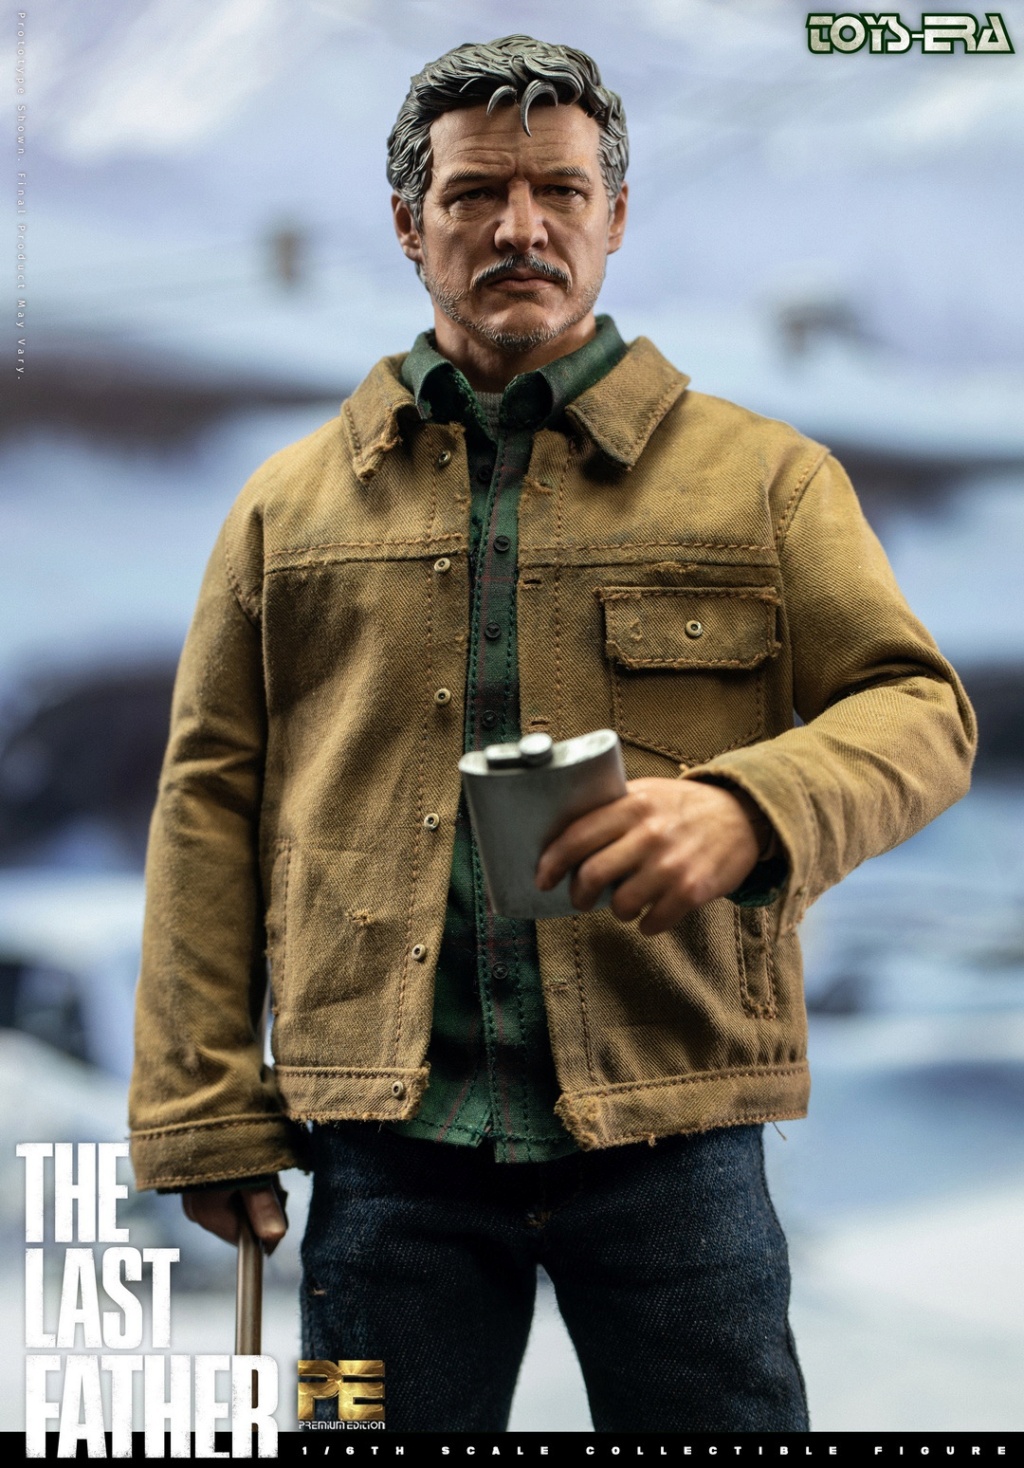 horror - NEW PRODUCT: Toys Era: PE015 1/6 Scale The Last Father 10531512